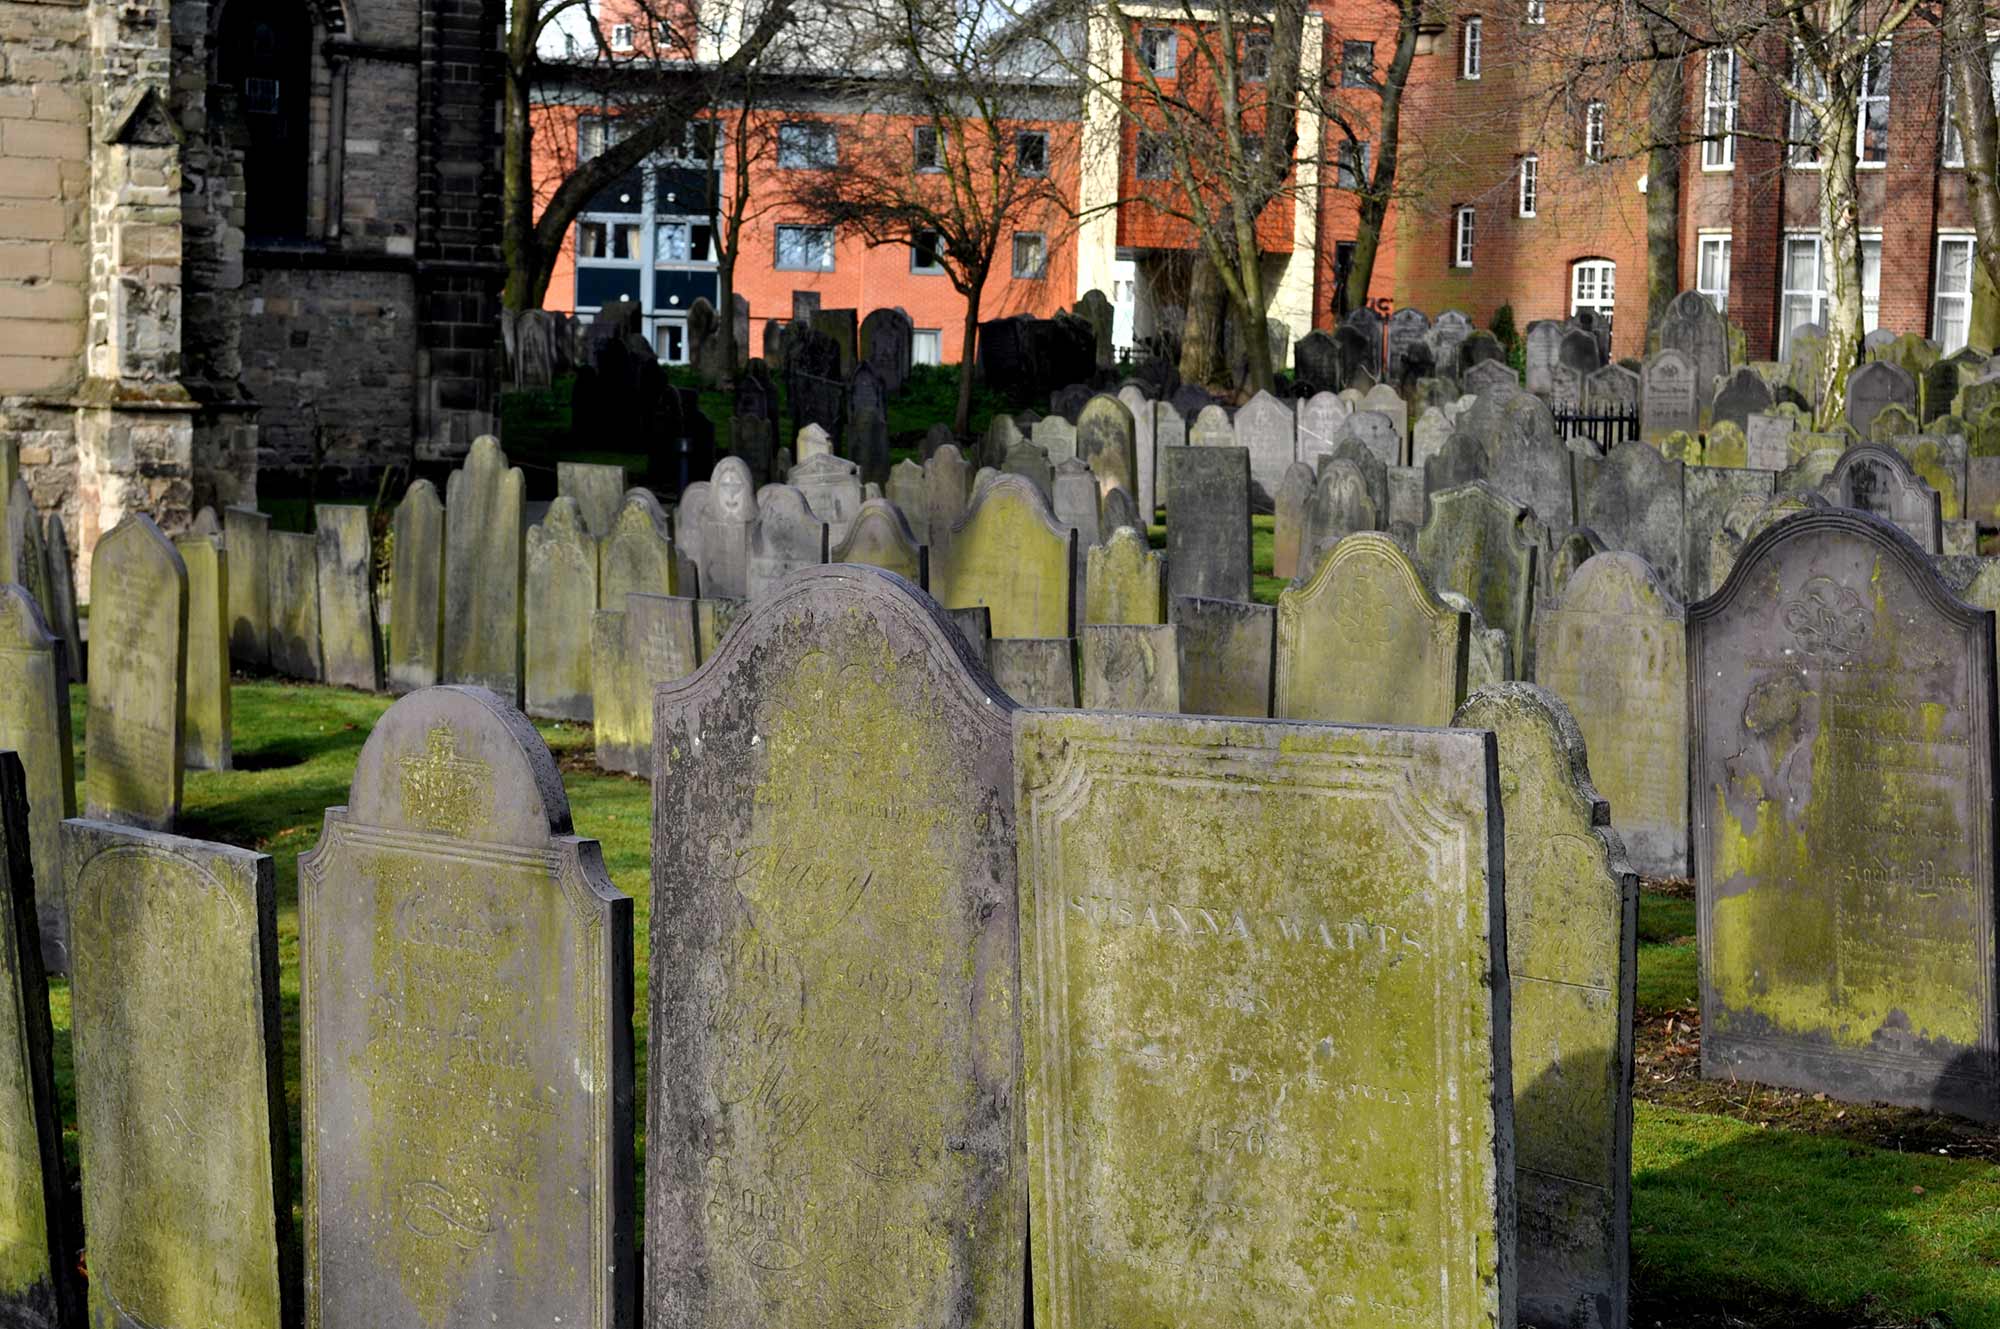 The churchyard houses many old gravestones -